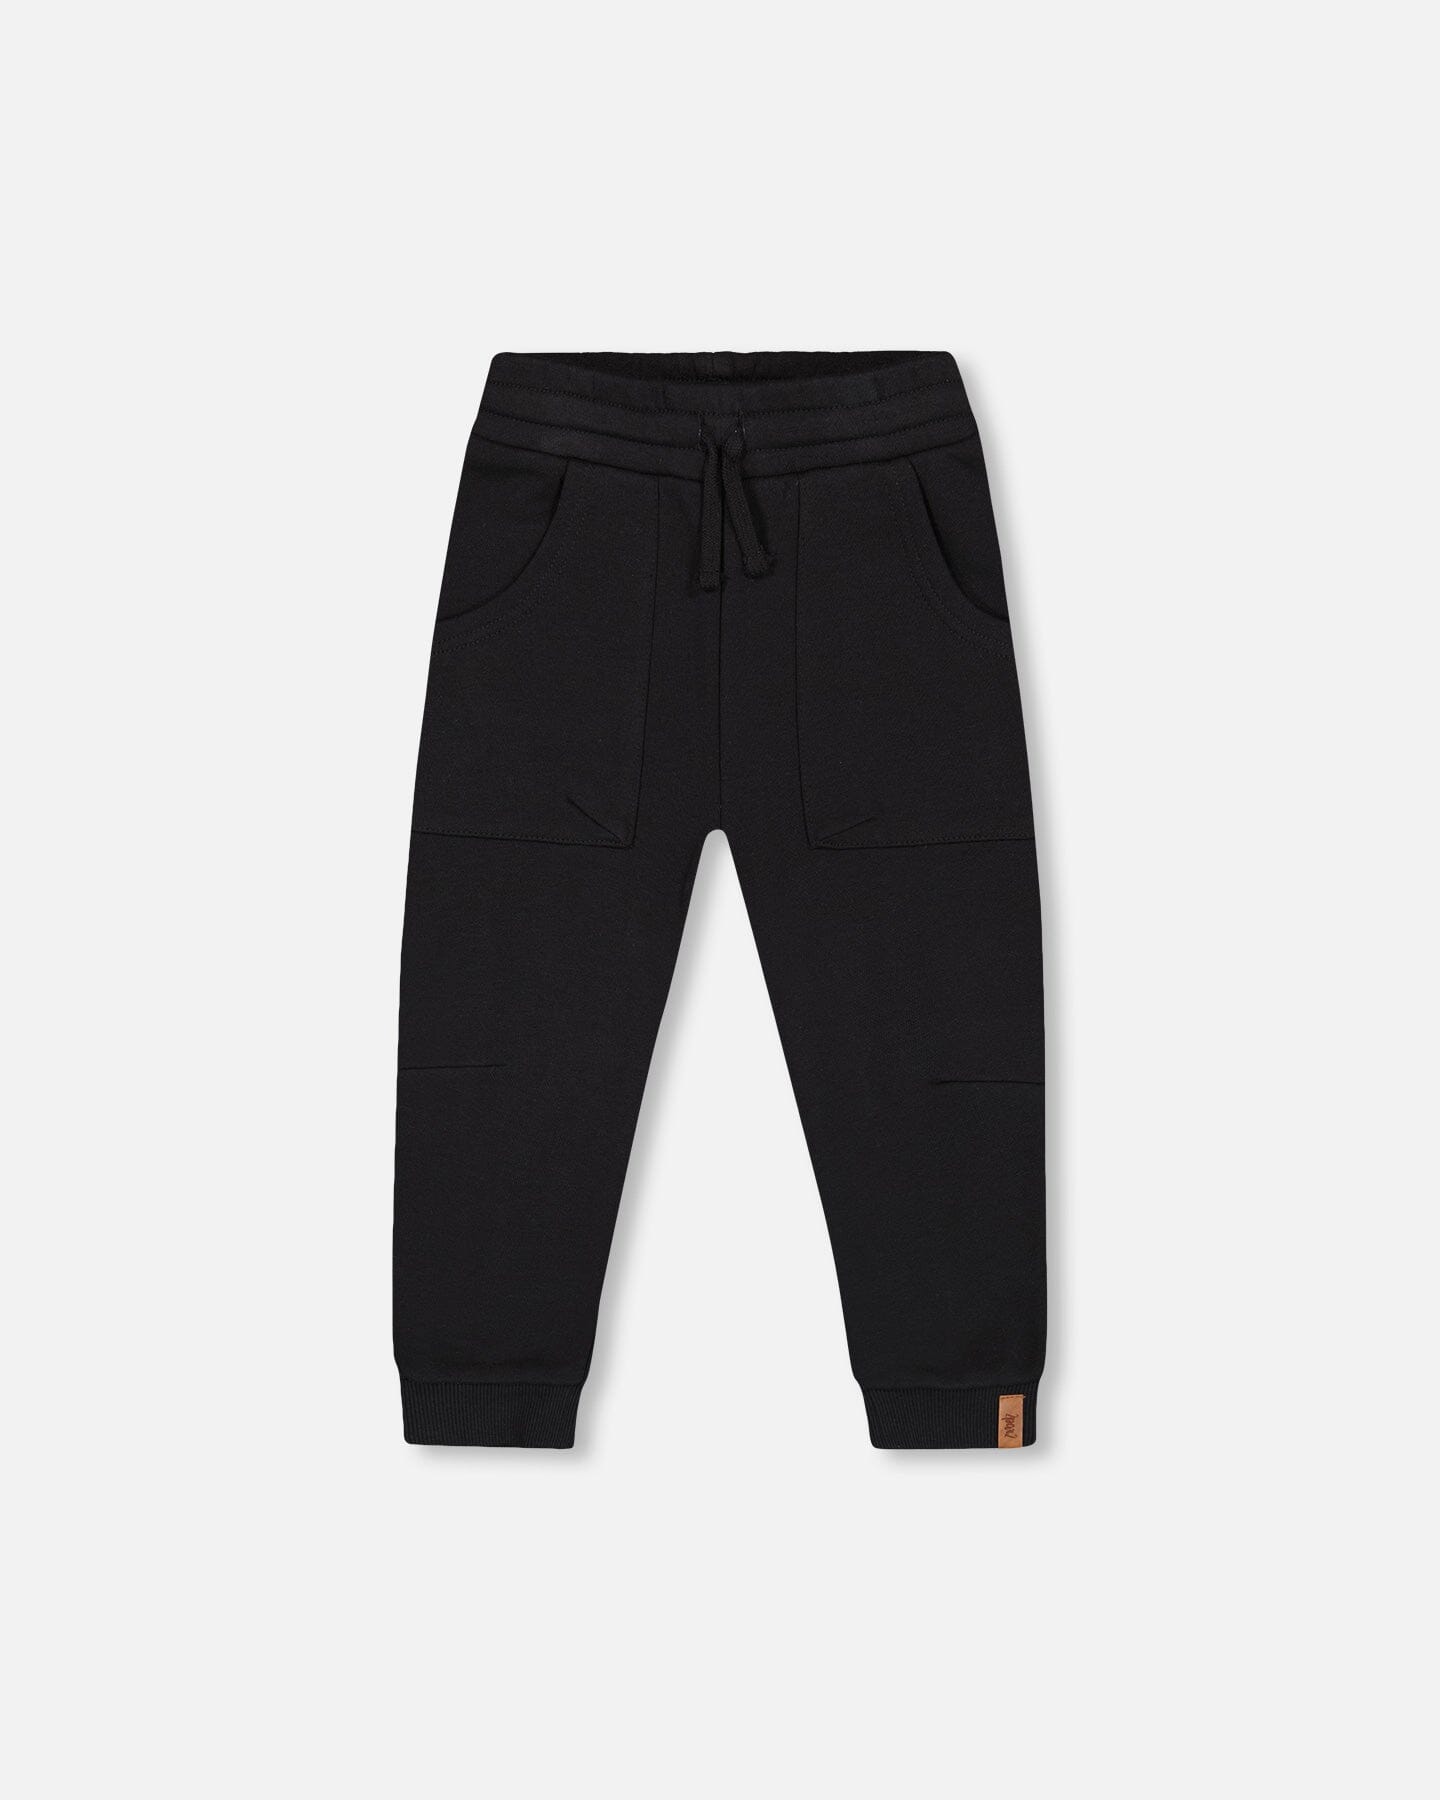 French Terry Pant Black